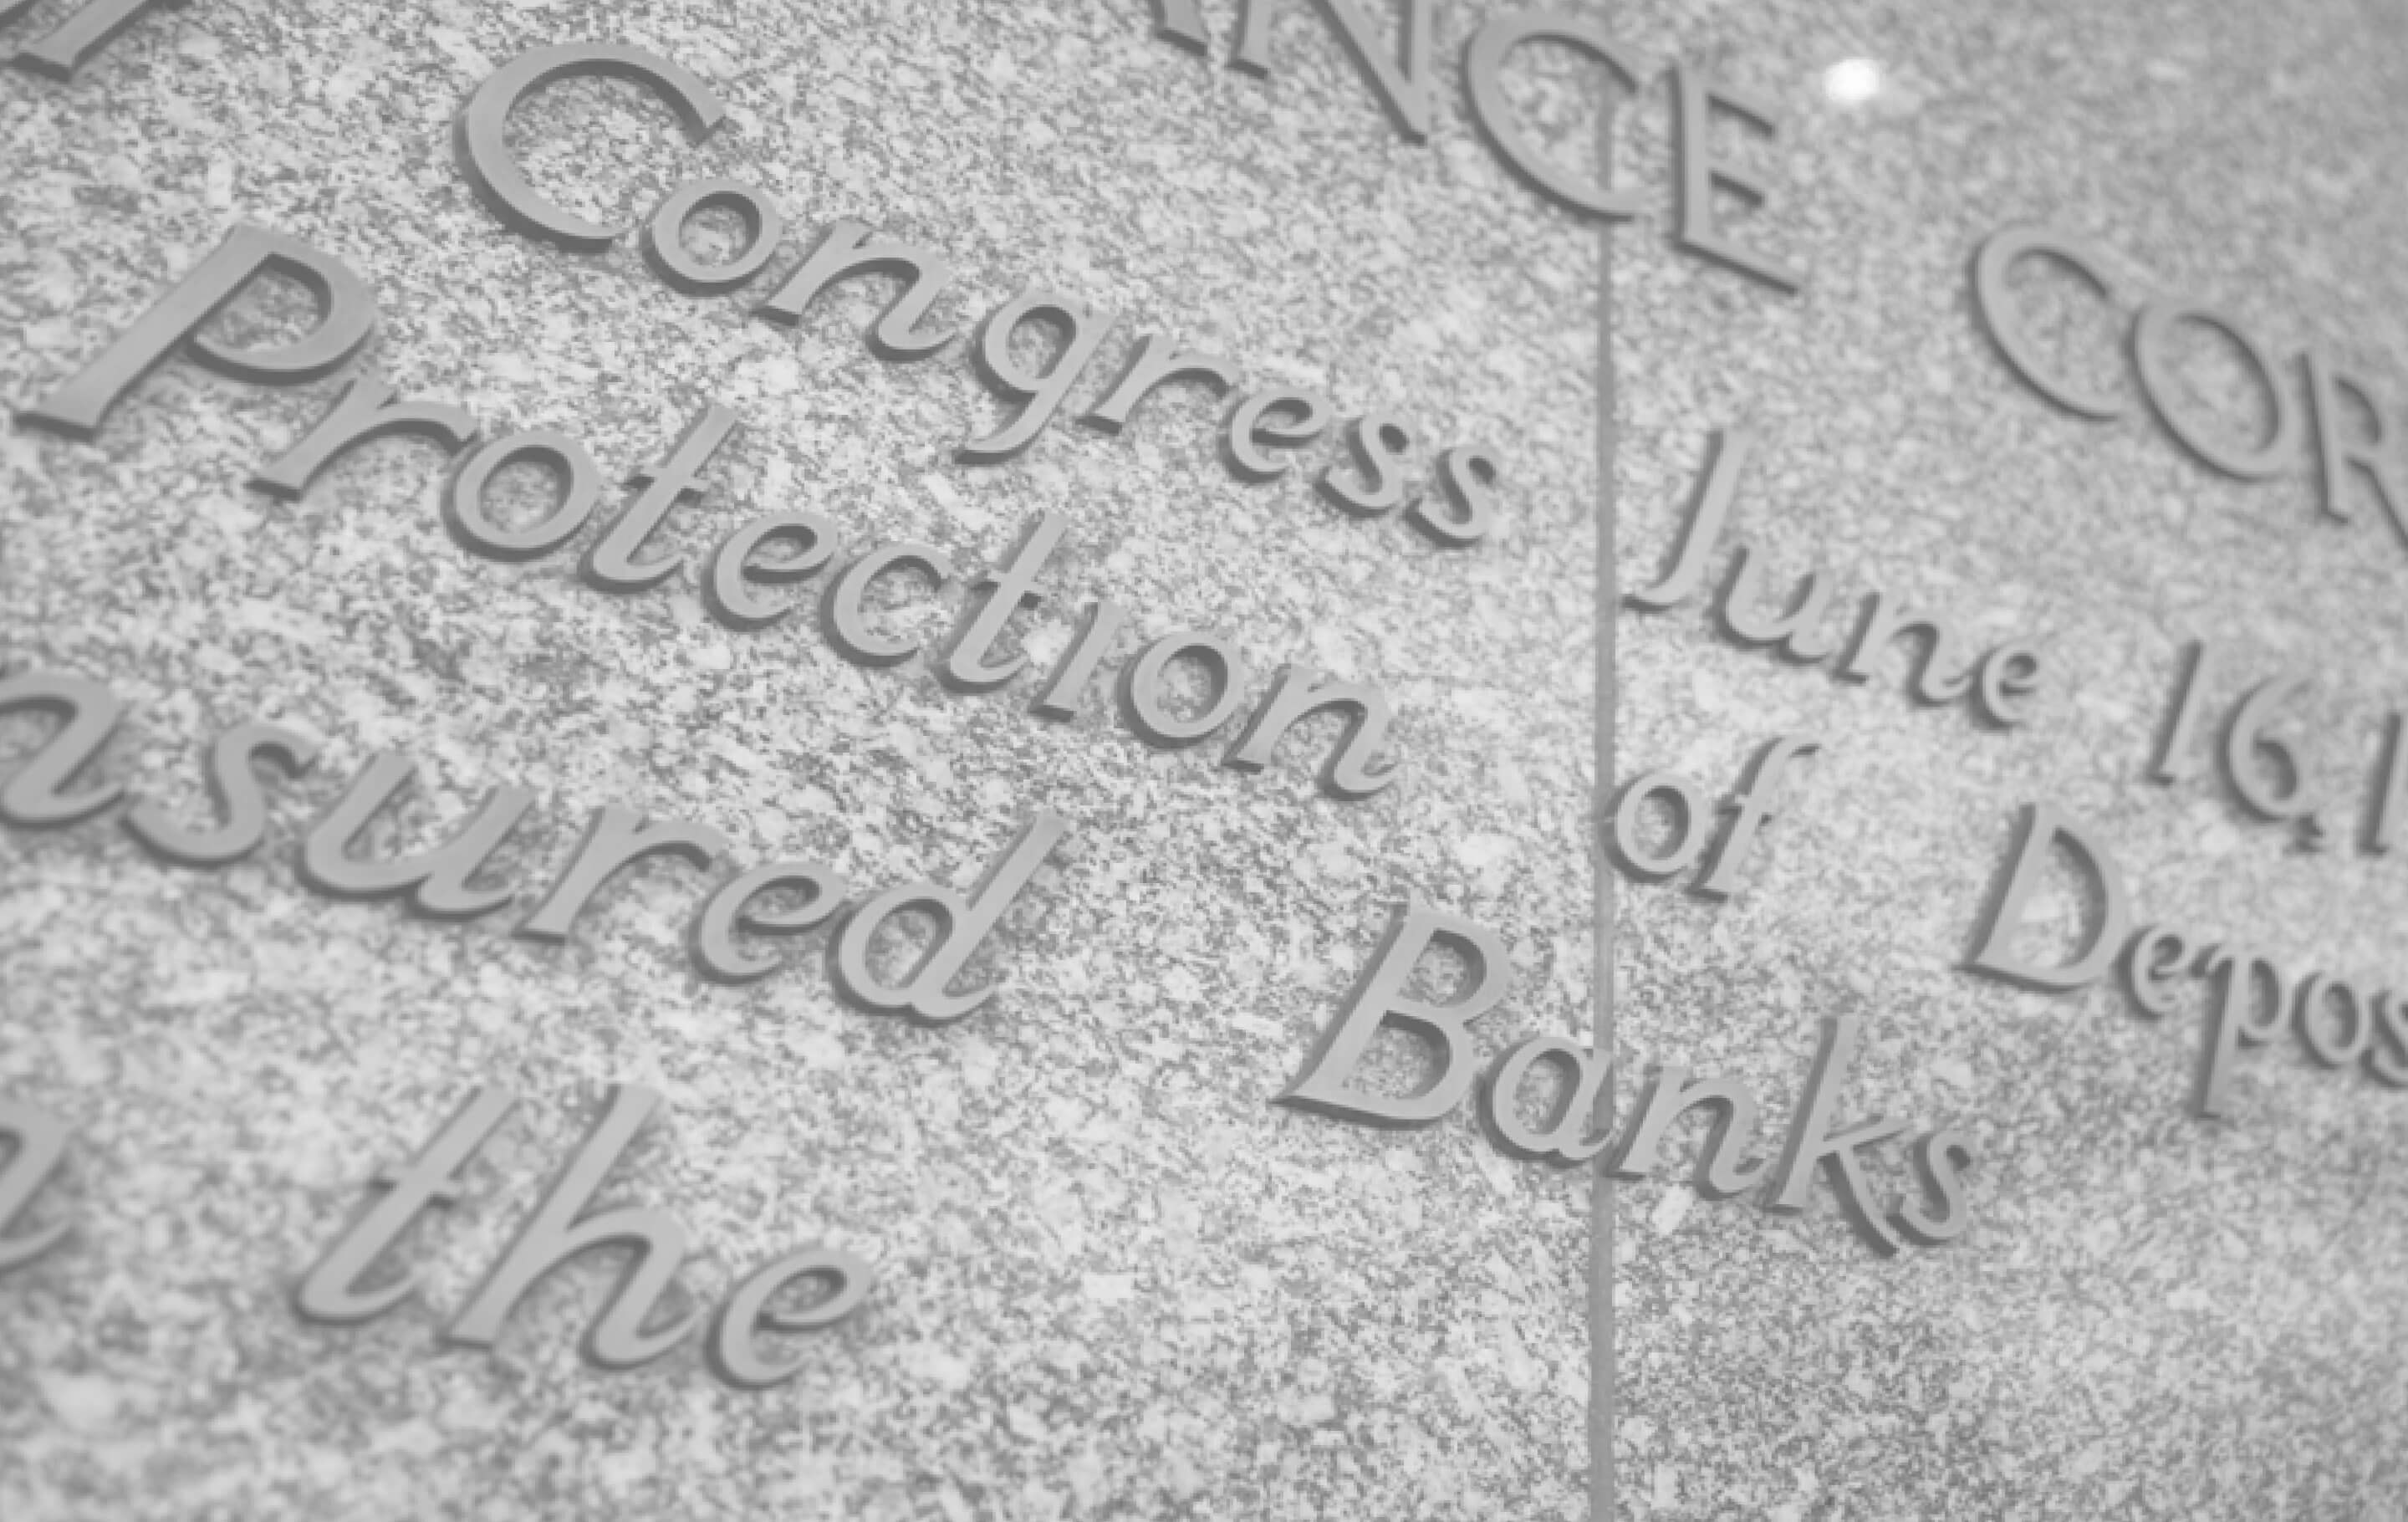 Image of words on the FDIC building